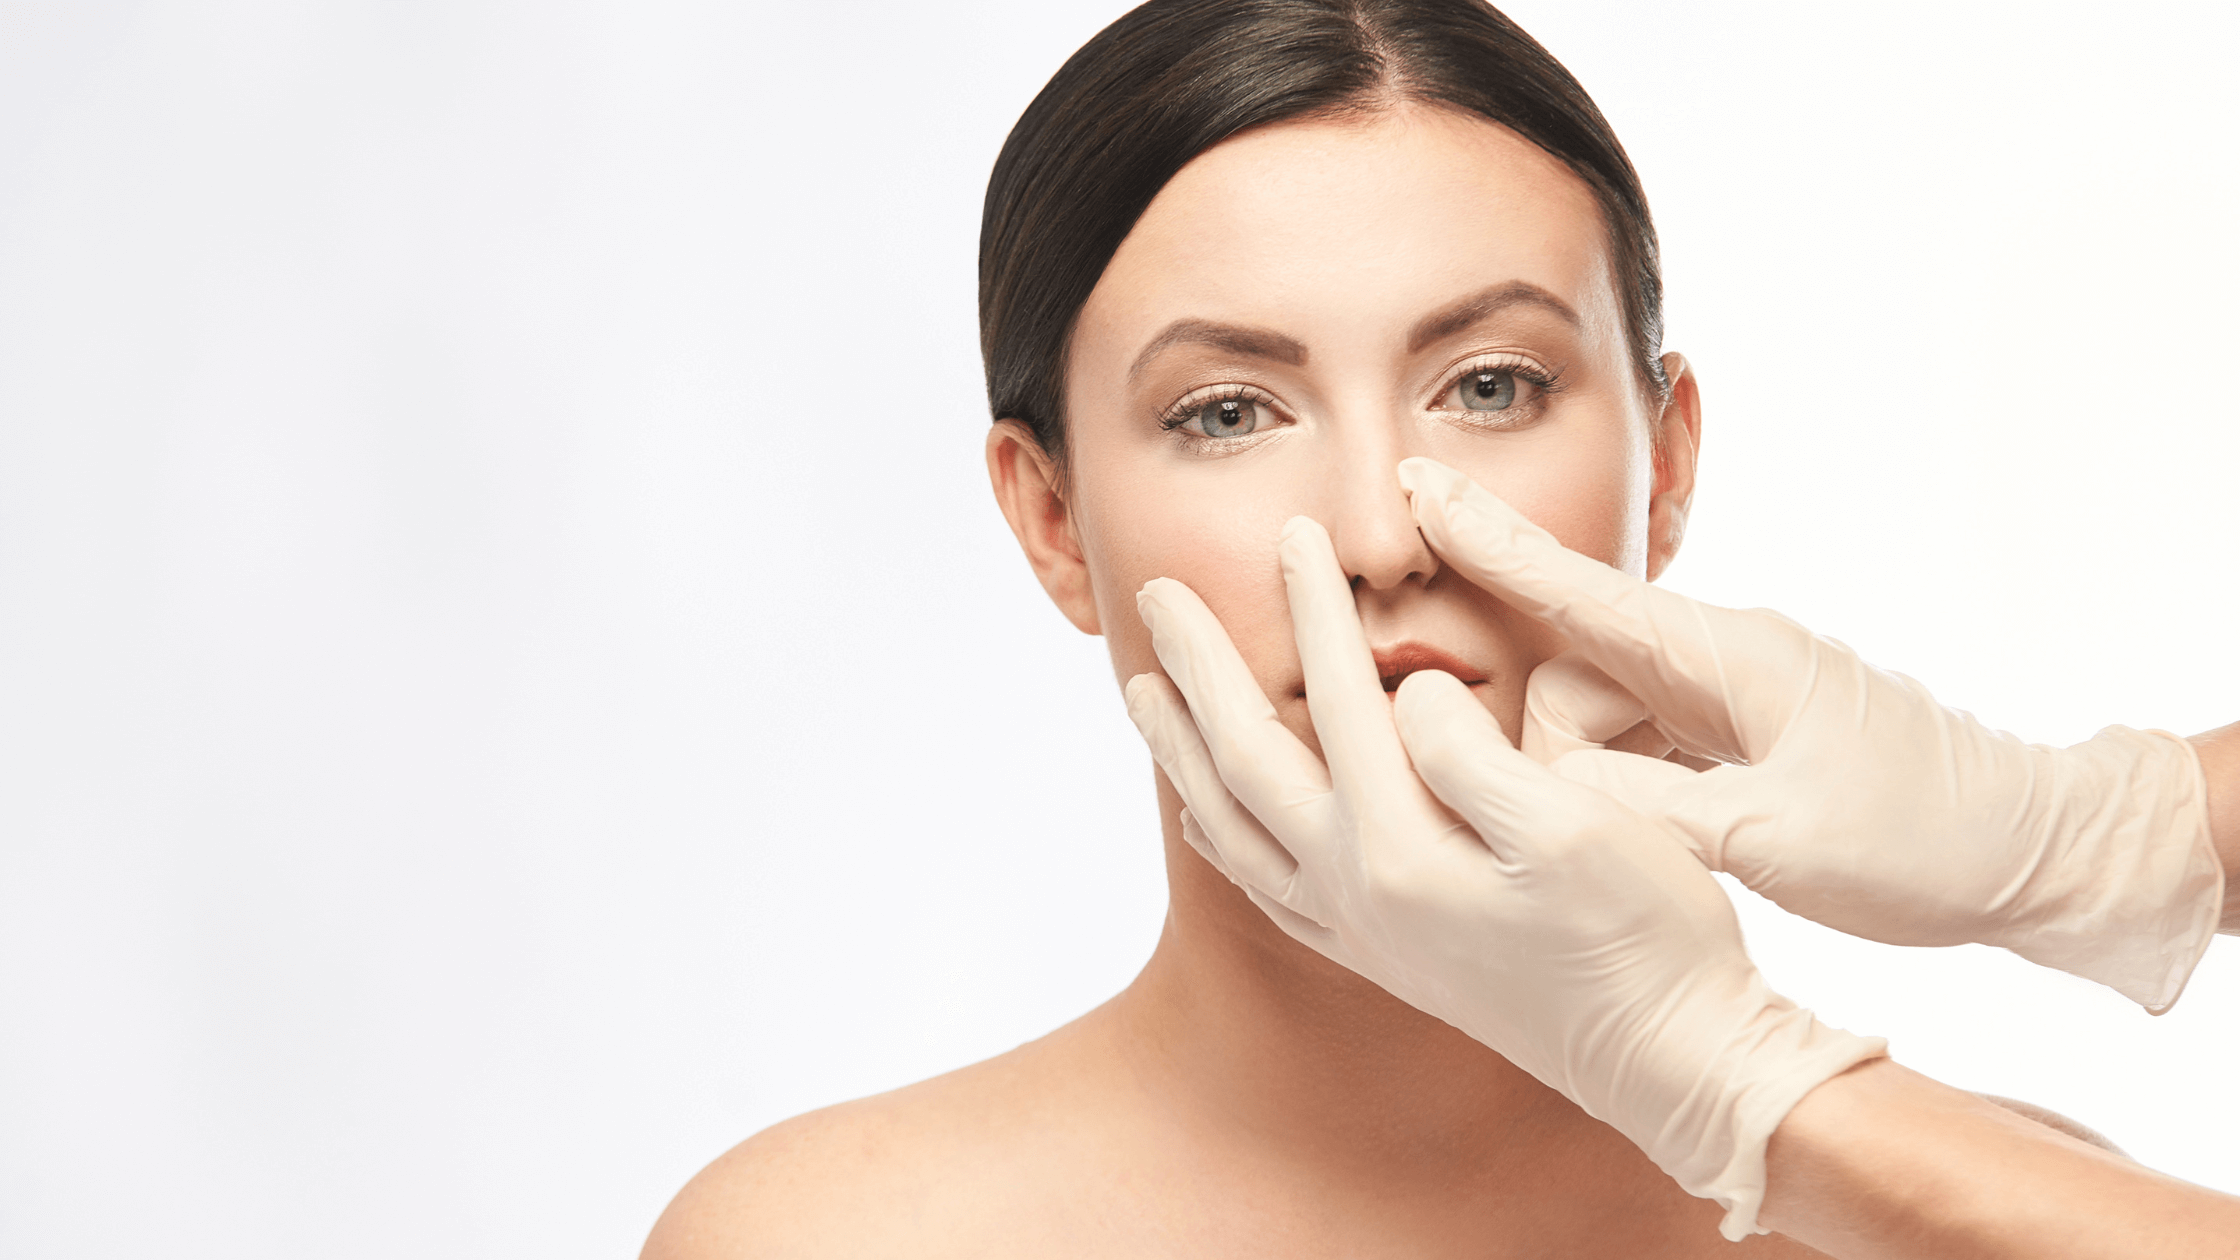 Demystifying the Rhinoplasty Process: What You Need to Know